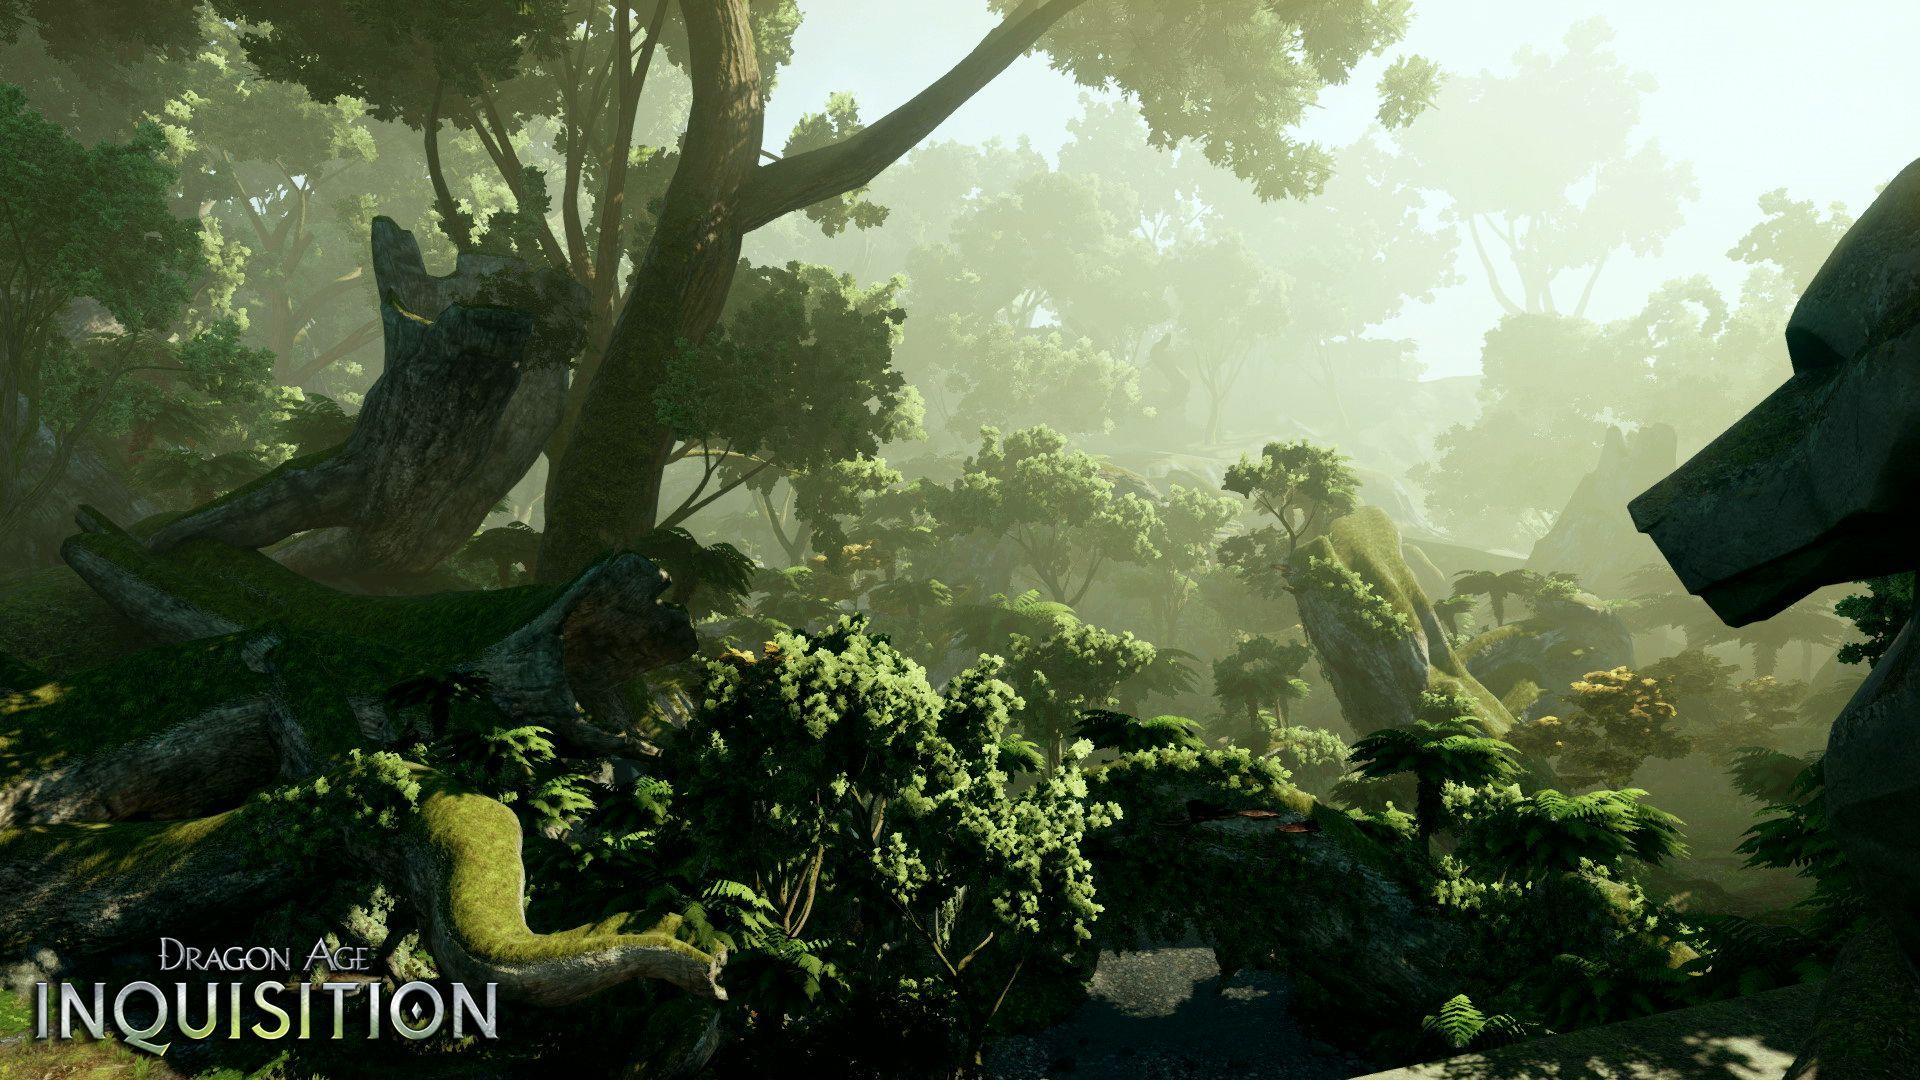 Dragon Age Inquisition Wallpapers 46389 1920x1080 px ~ HDWallSource